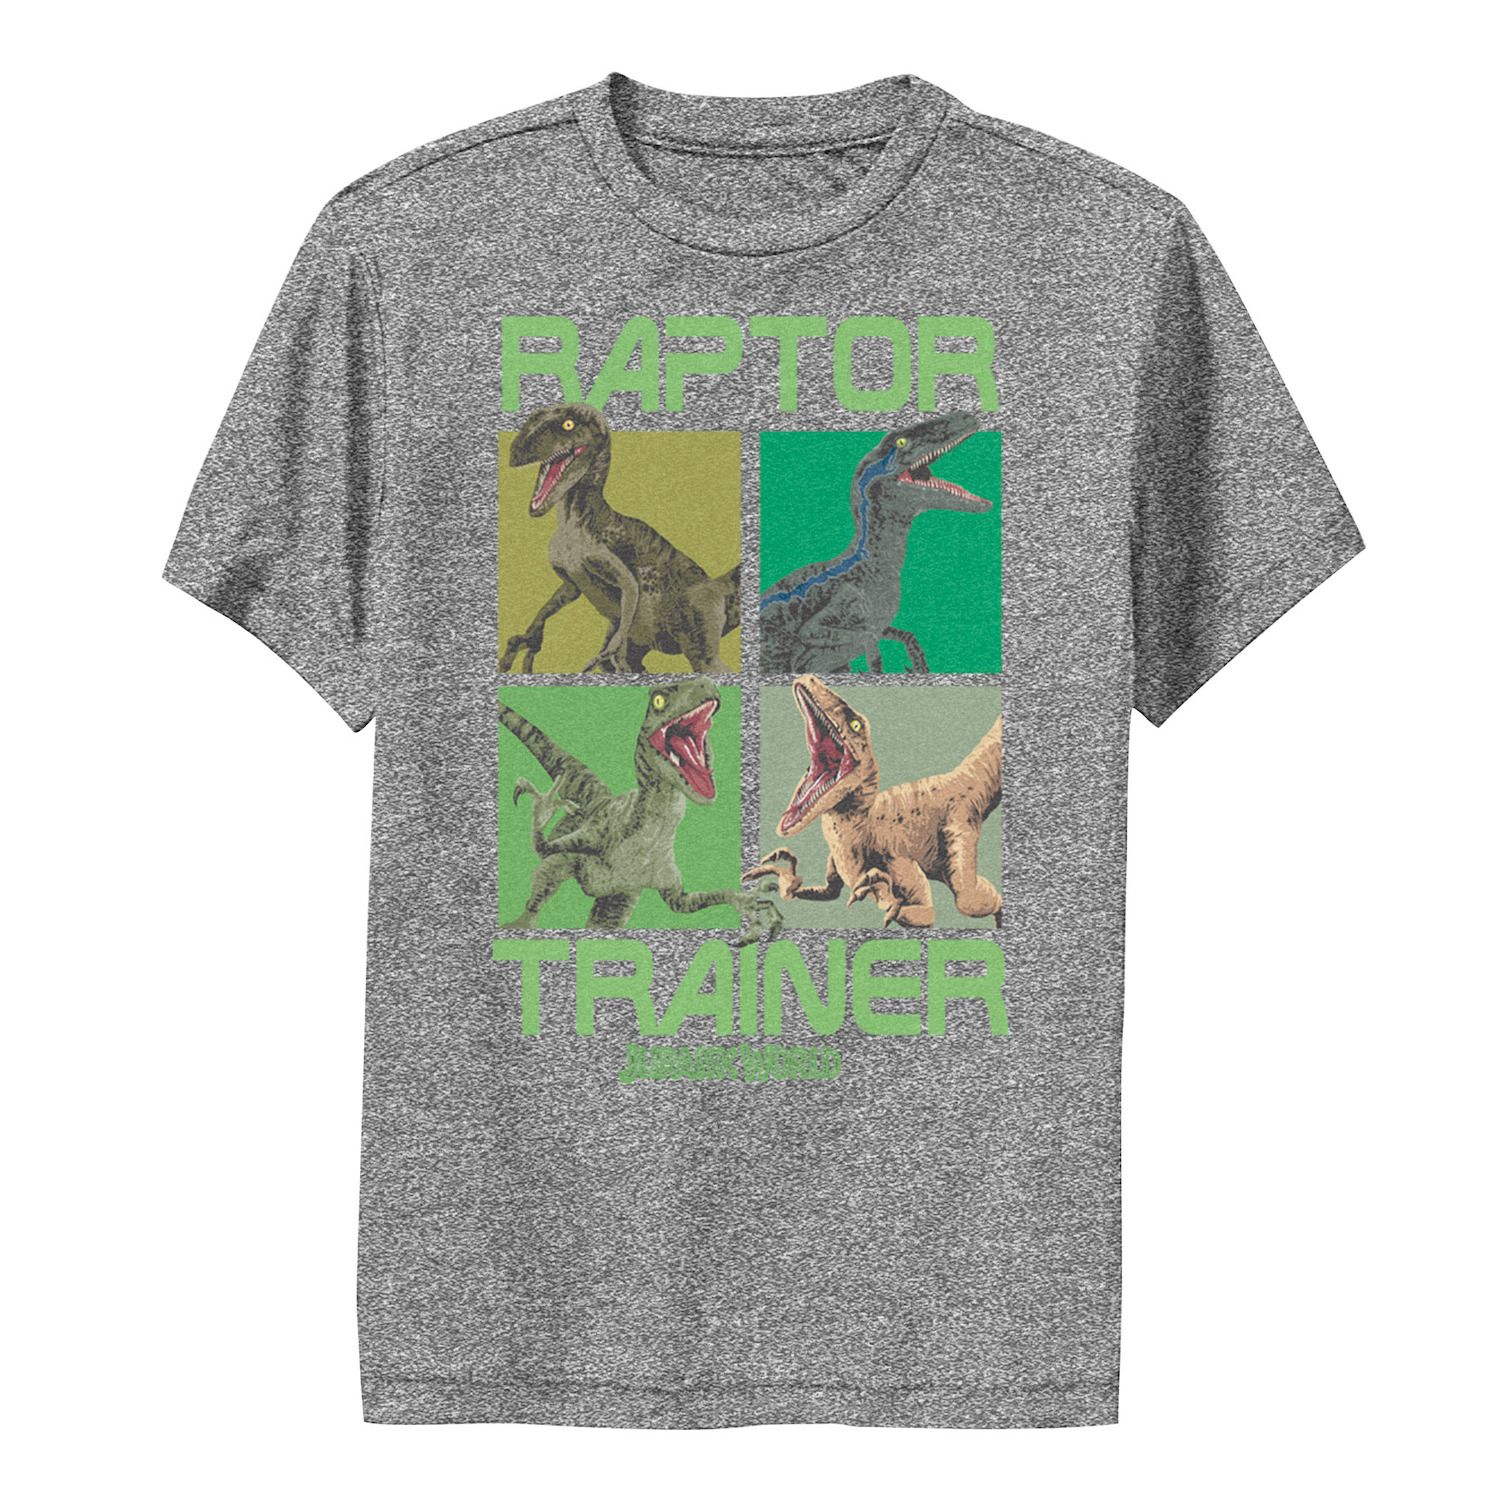 Image for Licensed Character Boys 8-20 Jurassic World Raptor Trainer Dino Boxes Performance Tee at Kohl's.